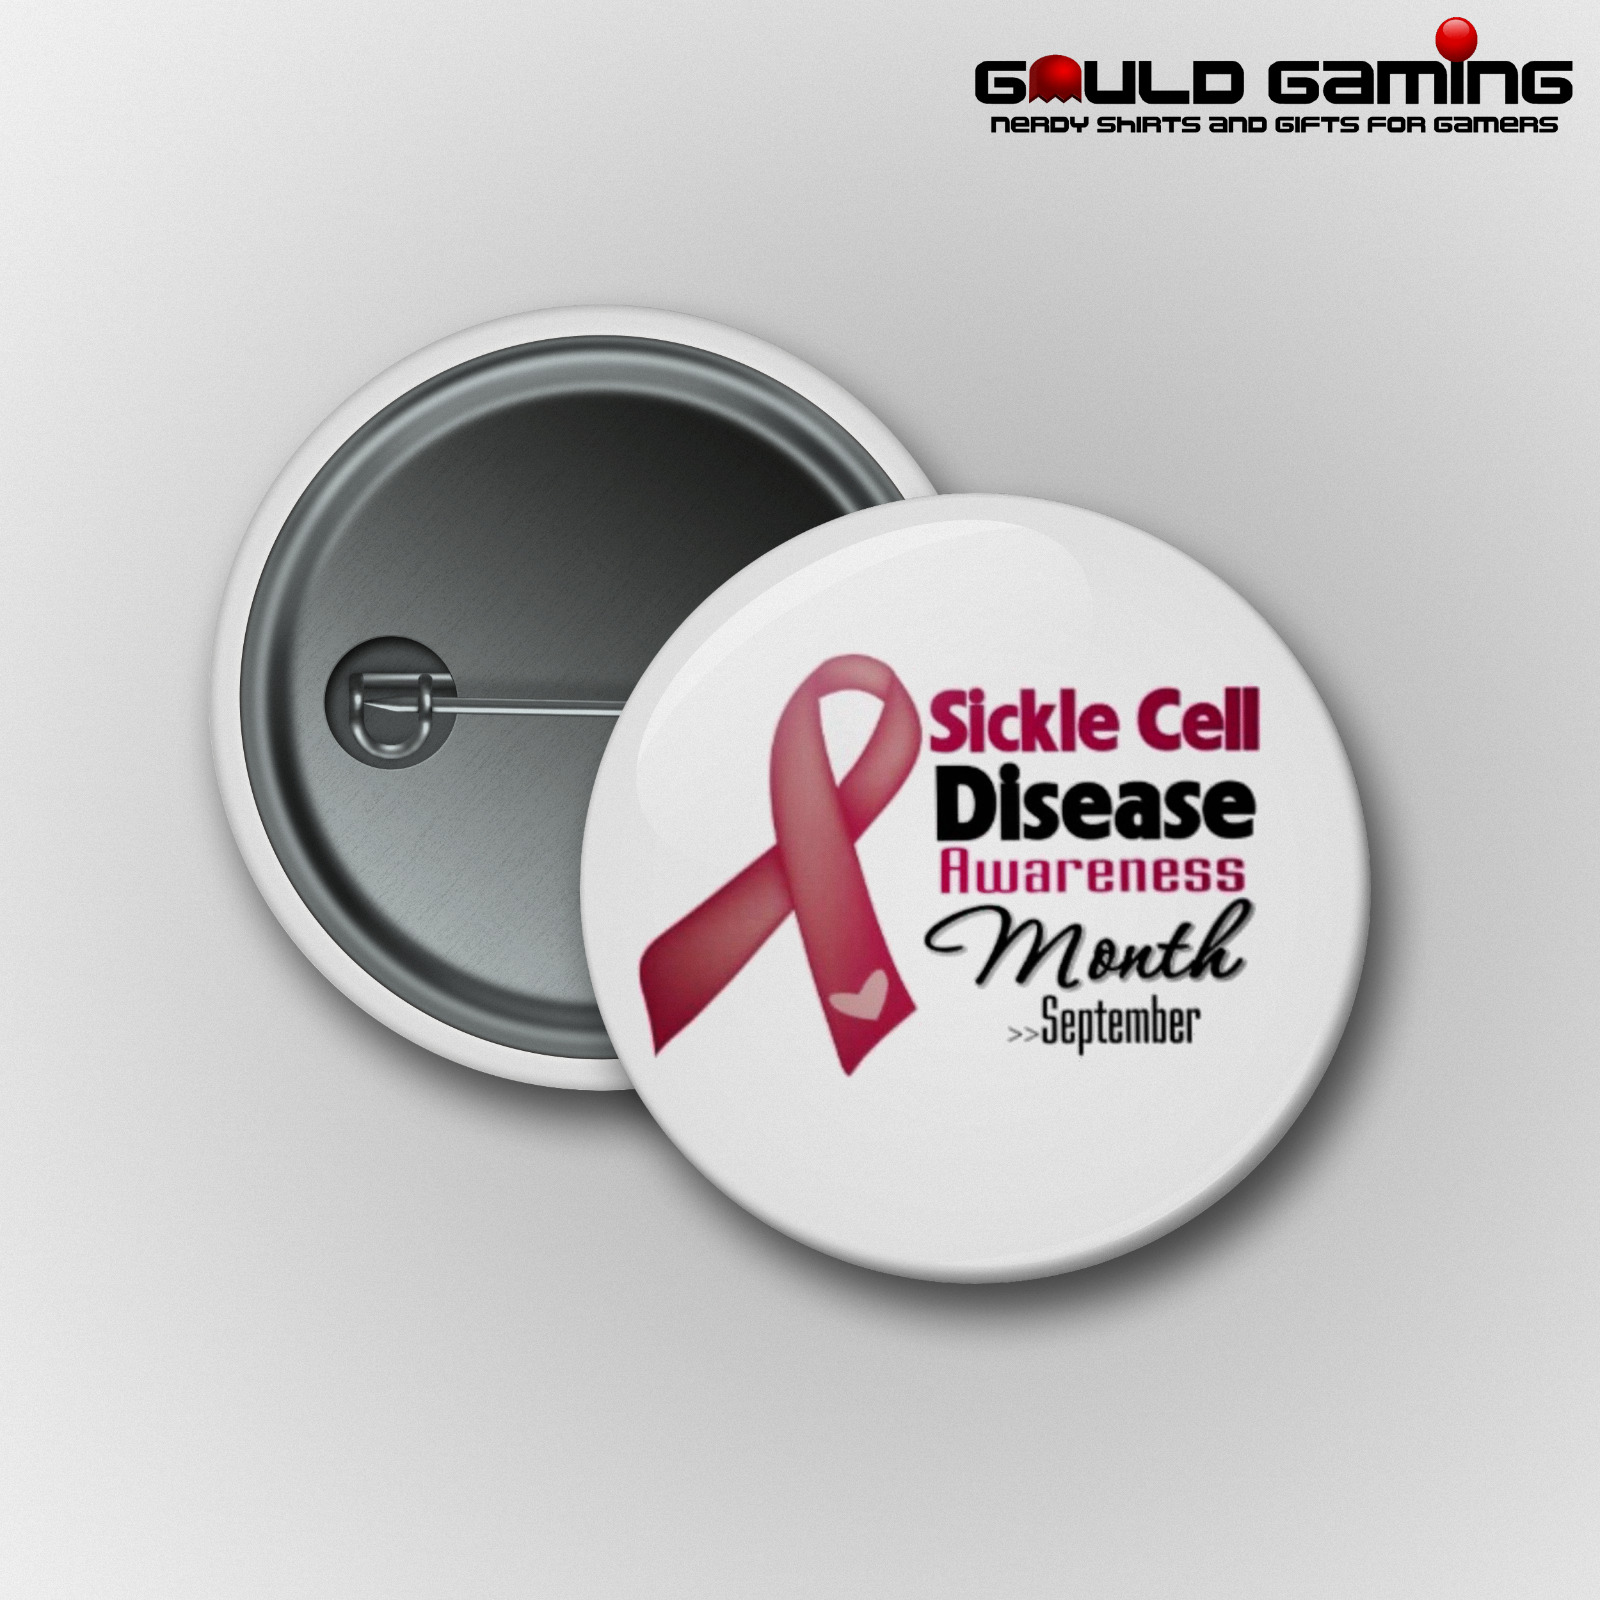 Sickle Cell Disease Awareness Month Buttons Badge Magnet 1.25in Ribbon New